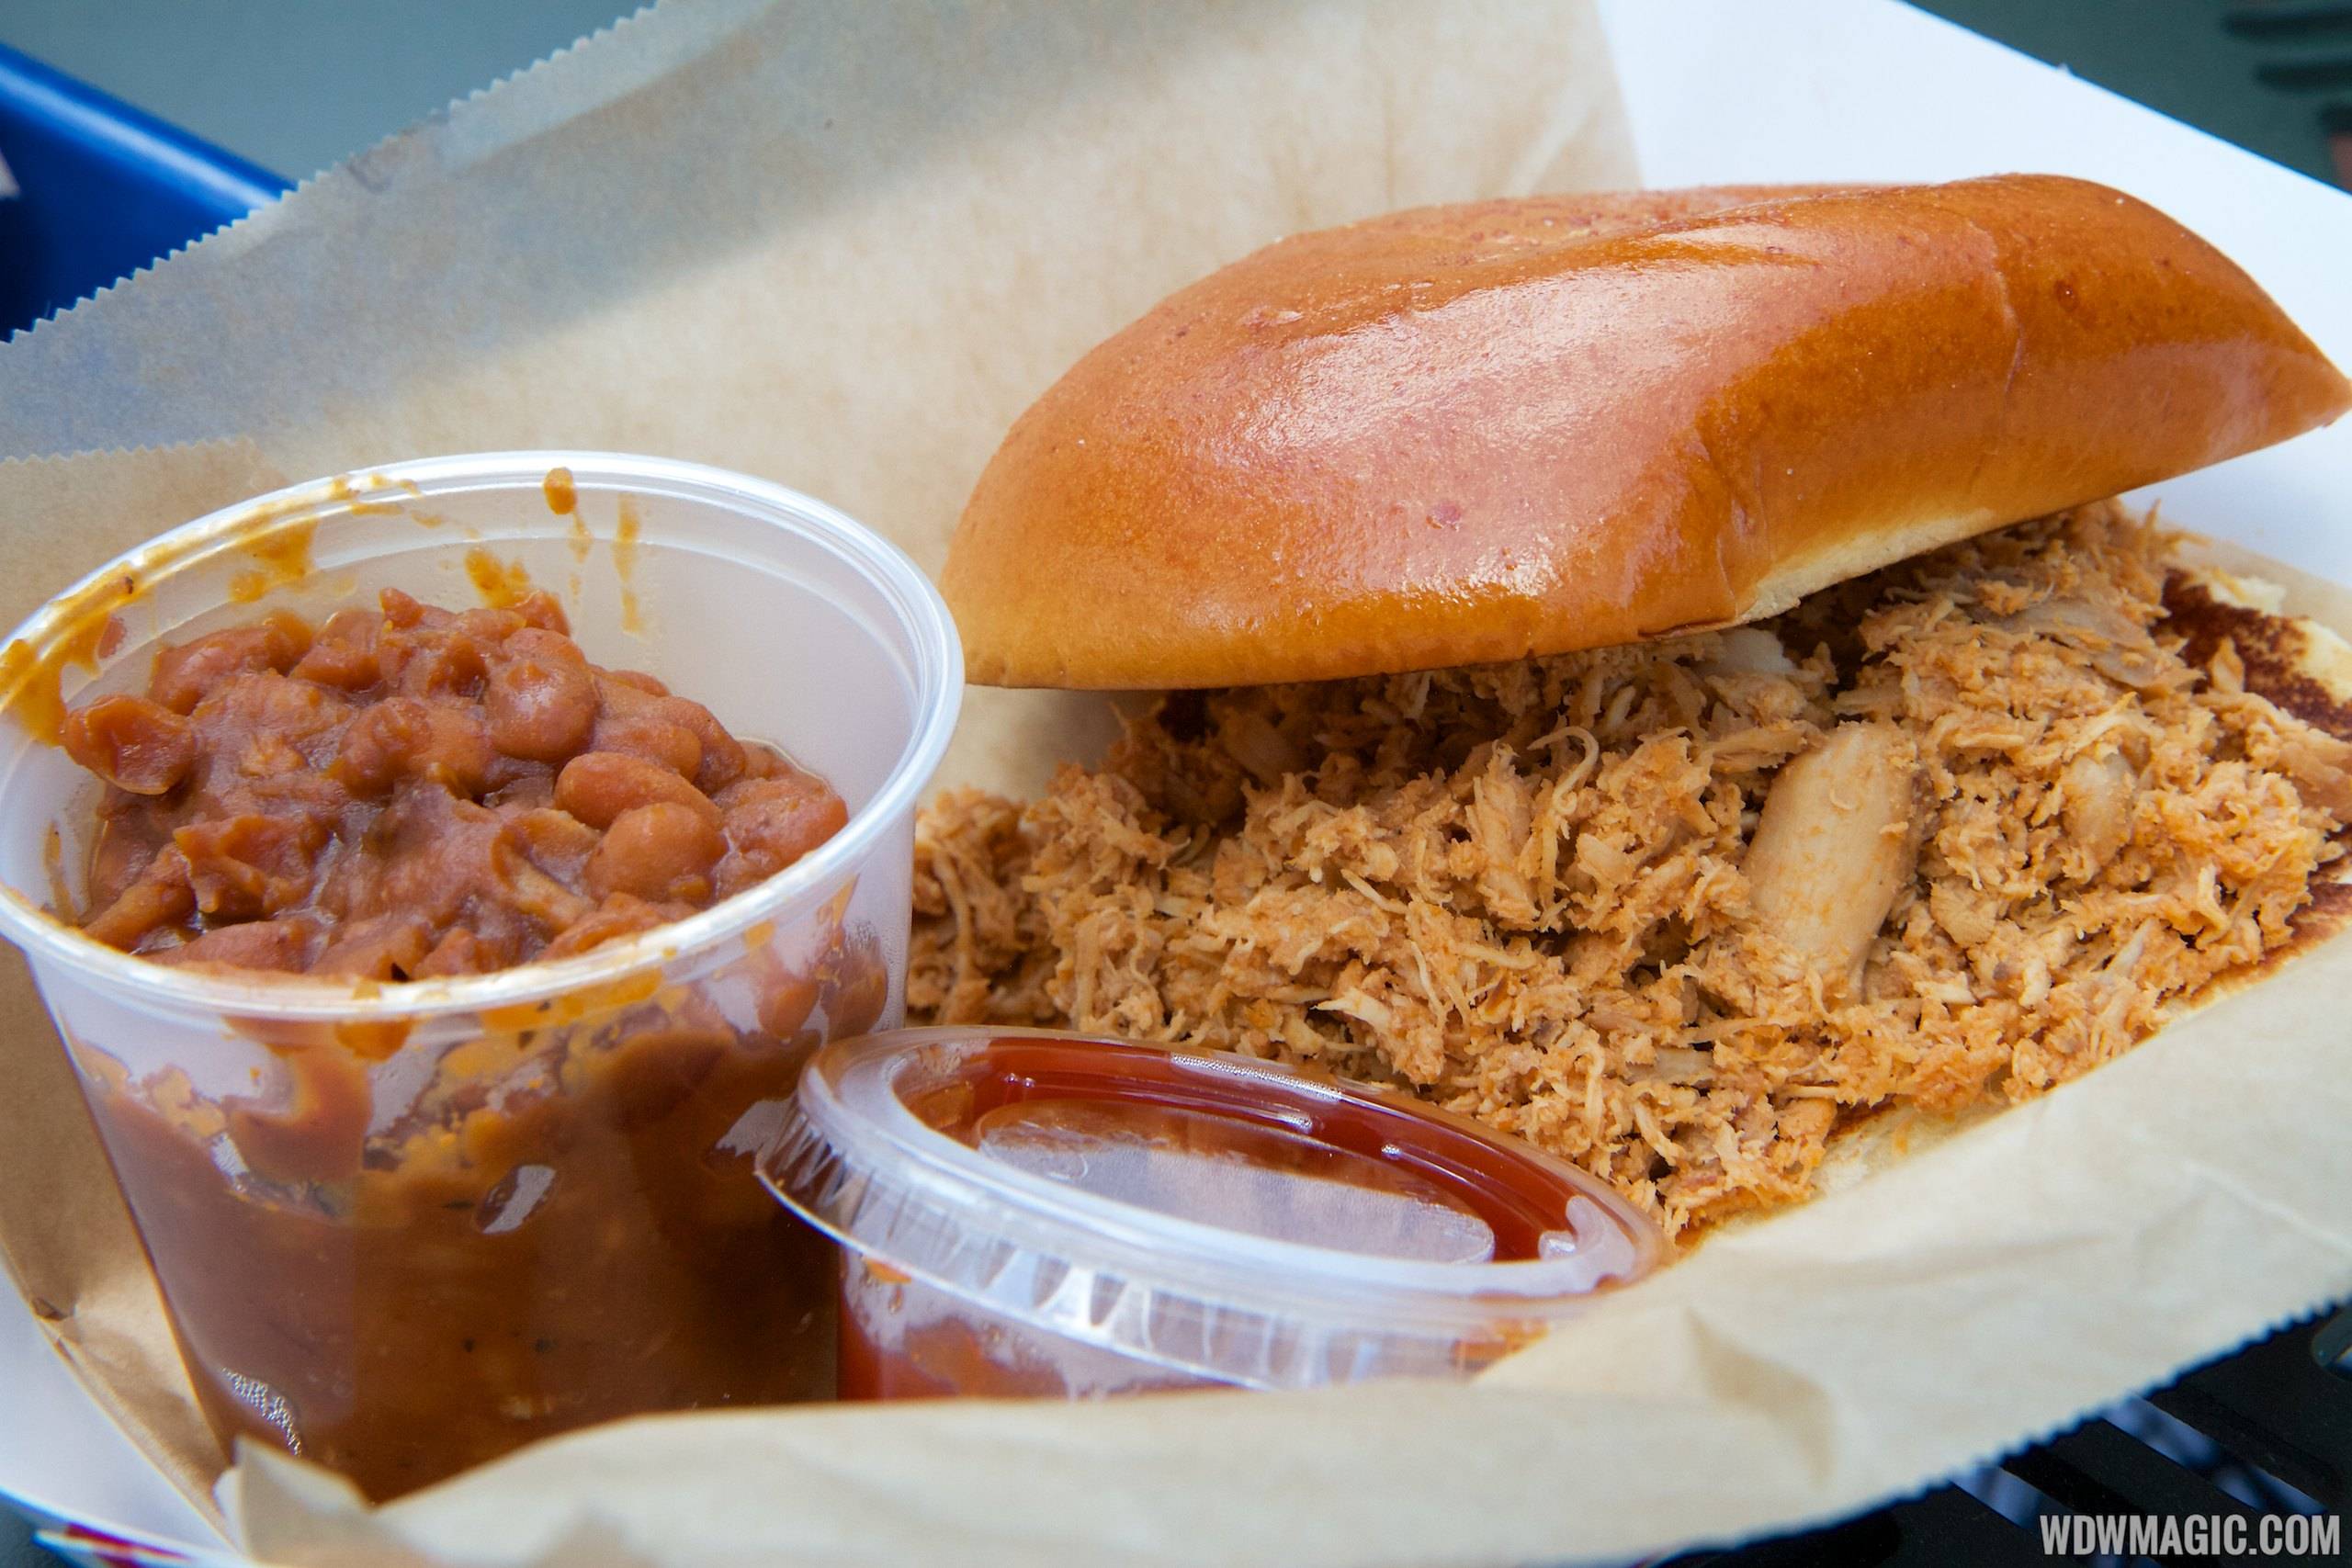 The Smokehouse - Pulled chicken sandwich